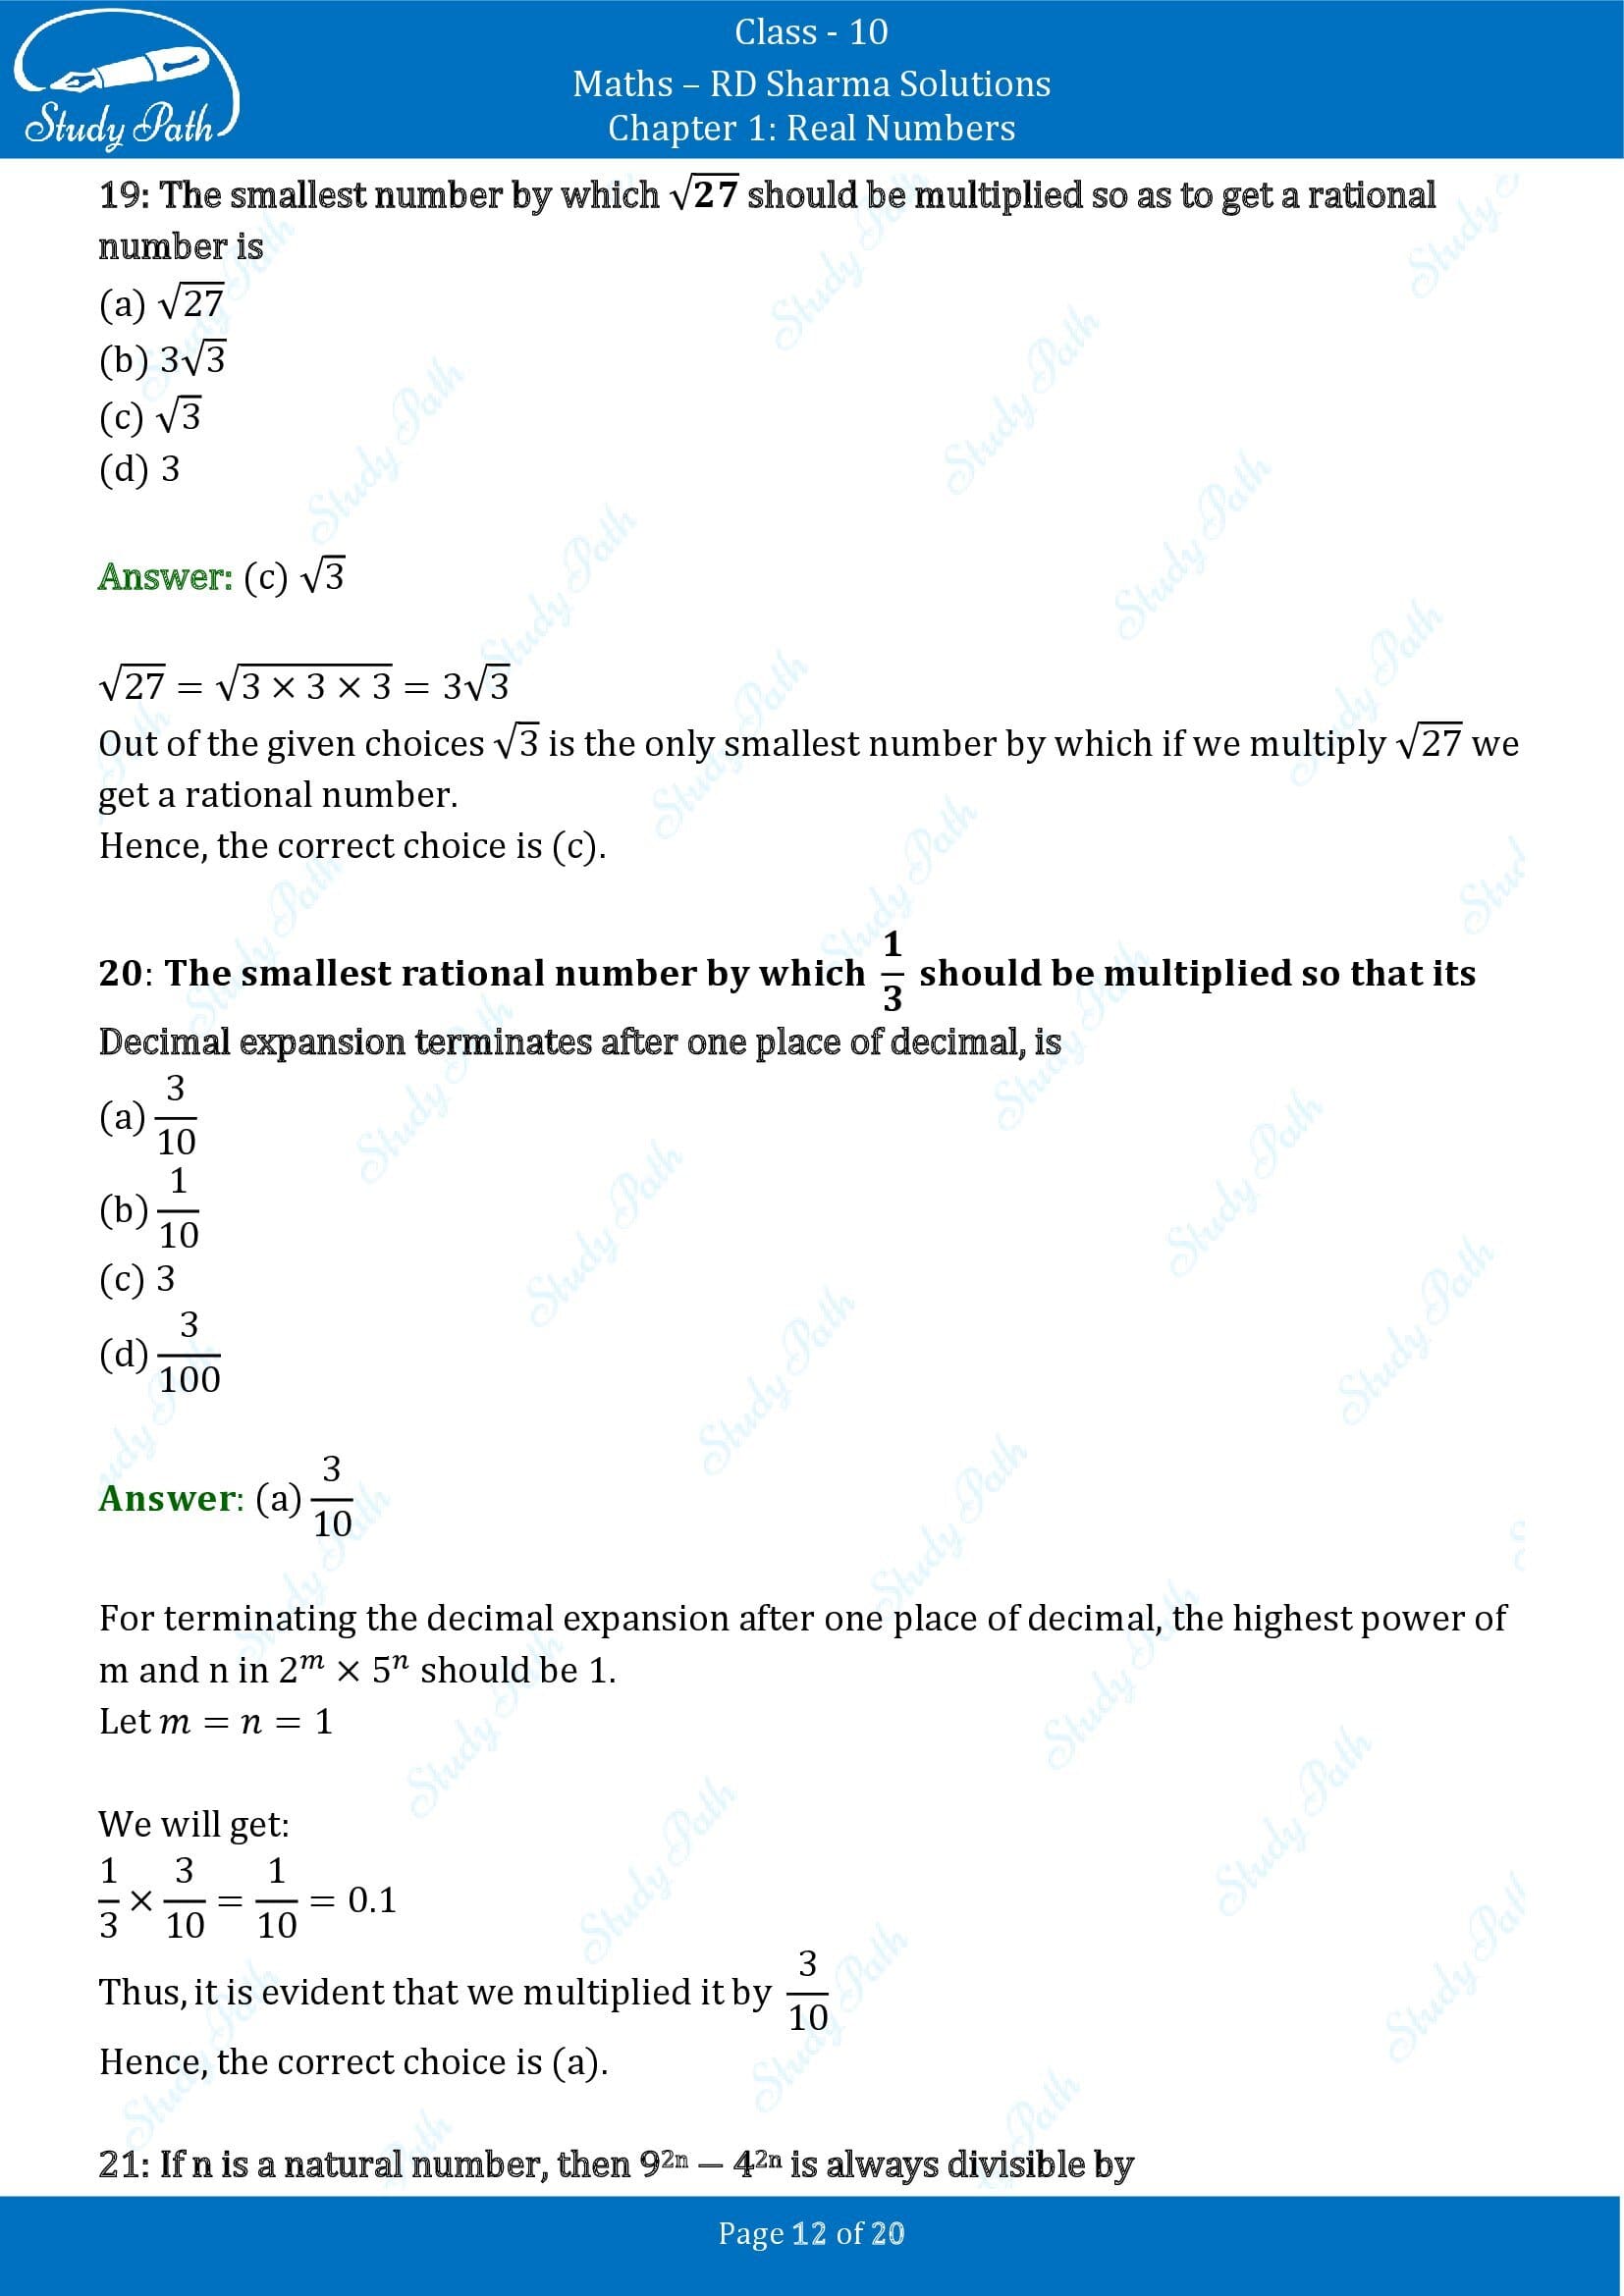 RD Sharma Solutions Class 10 Chapter 1 Real Numbers Multiple Choice Questions MCQs 00012